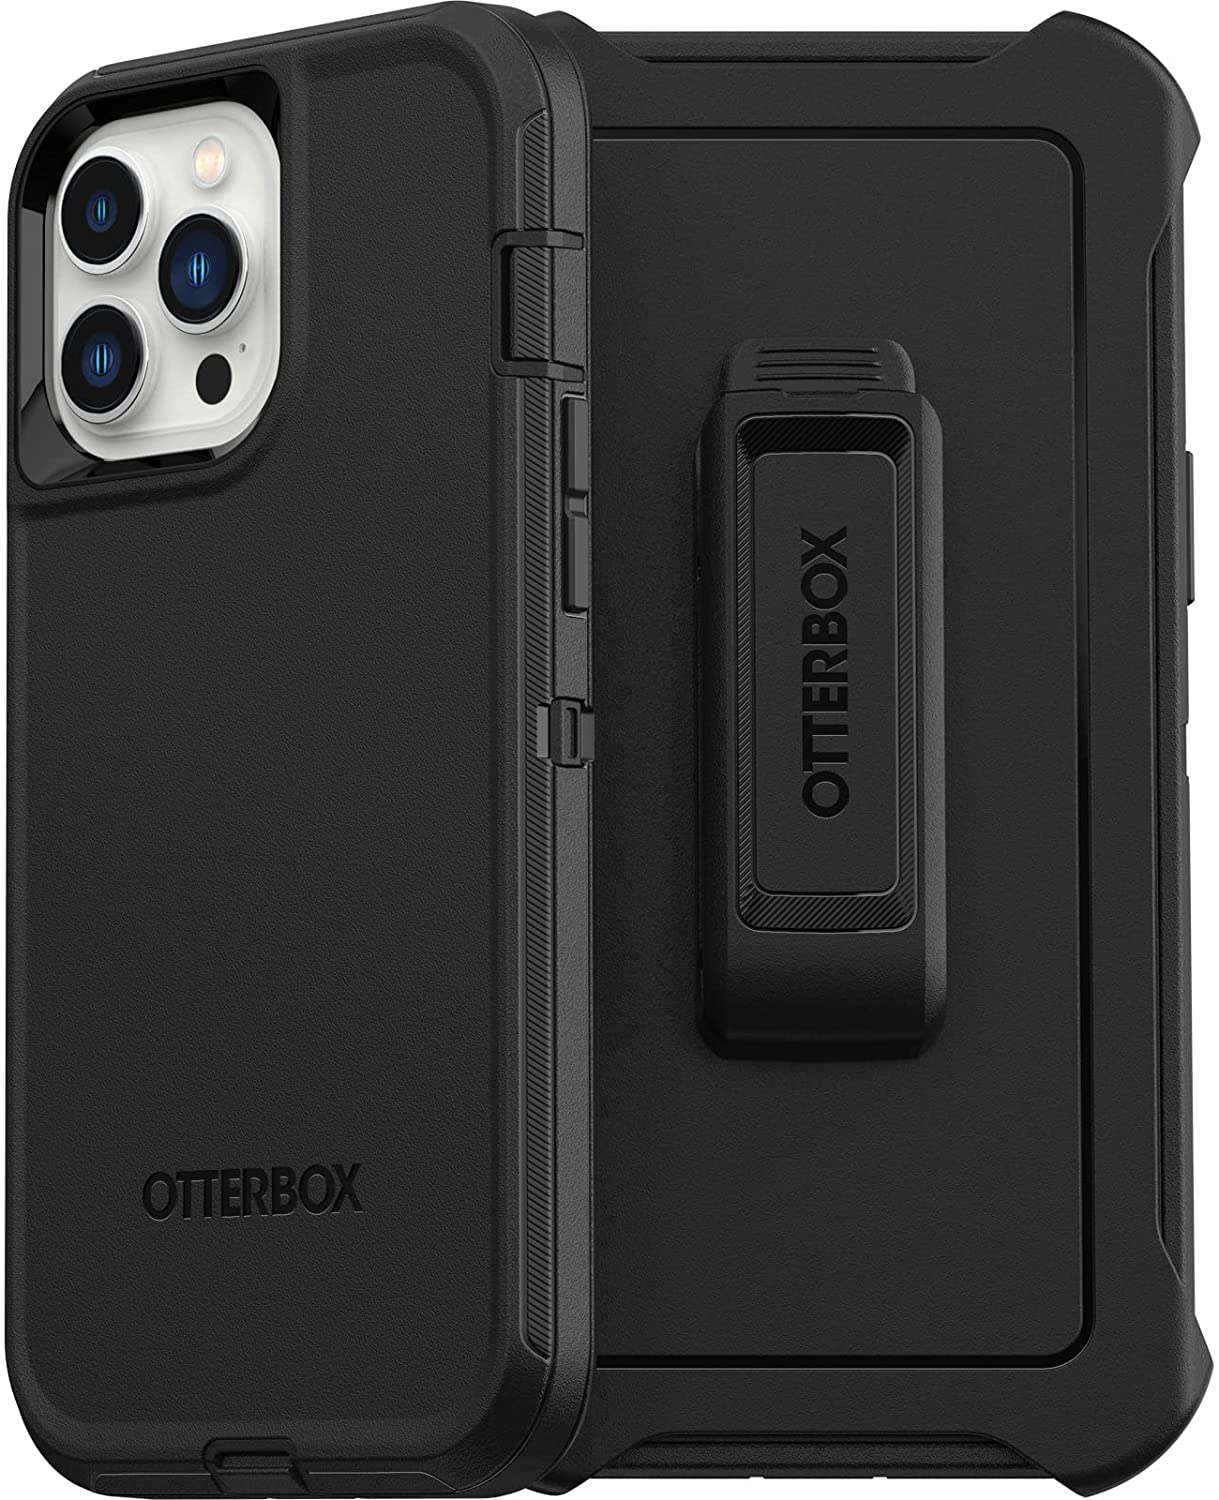 OtterBox DEFENDER SERIES for iPhone 13 Pro Max &amp; iPhone 12 Pro Max - Black (New)